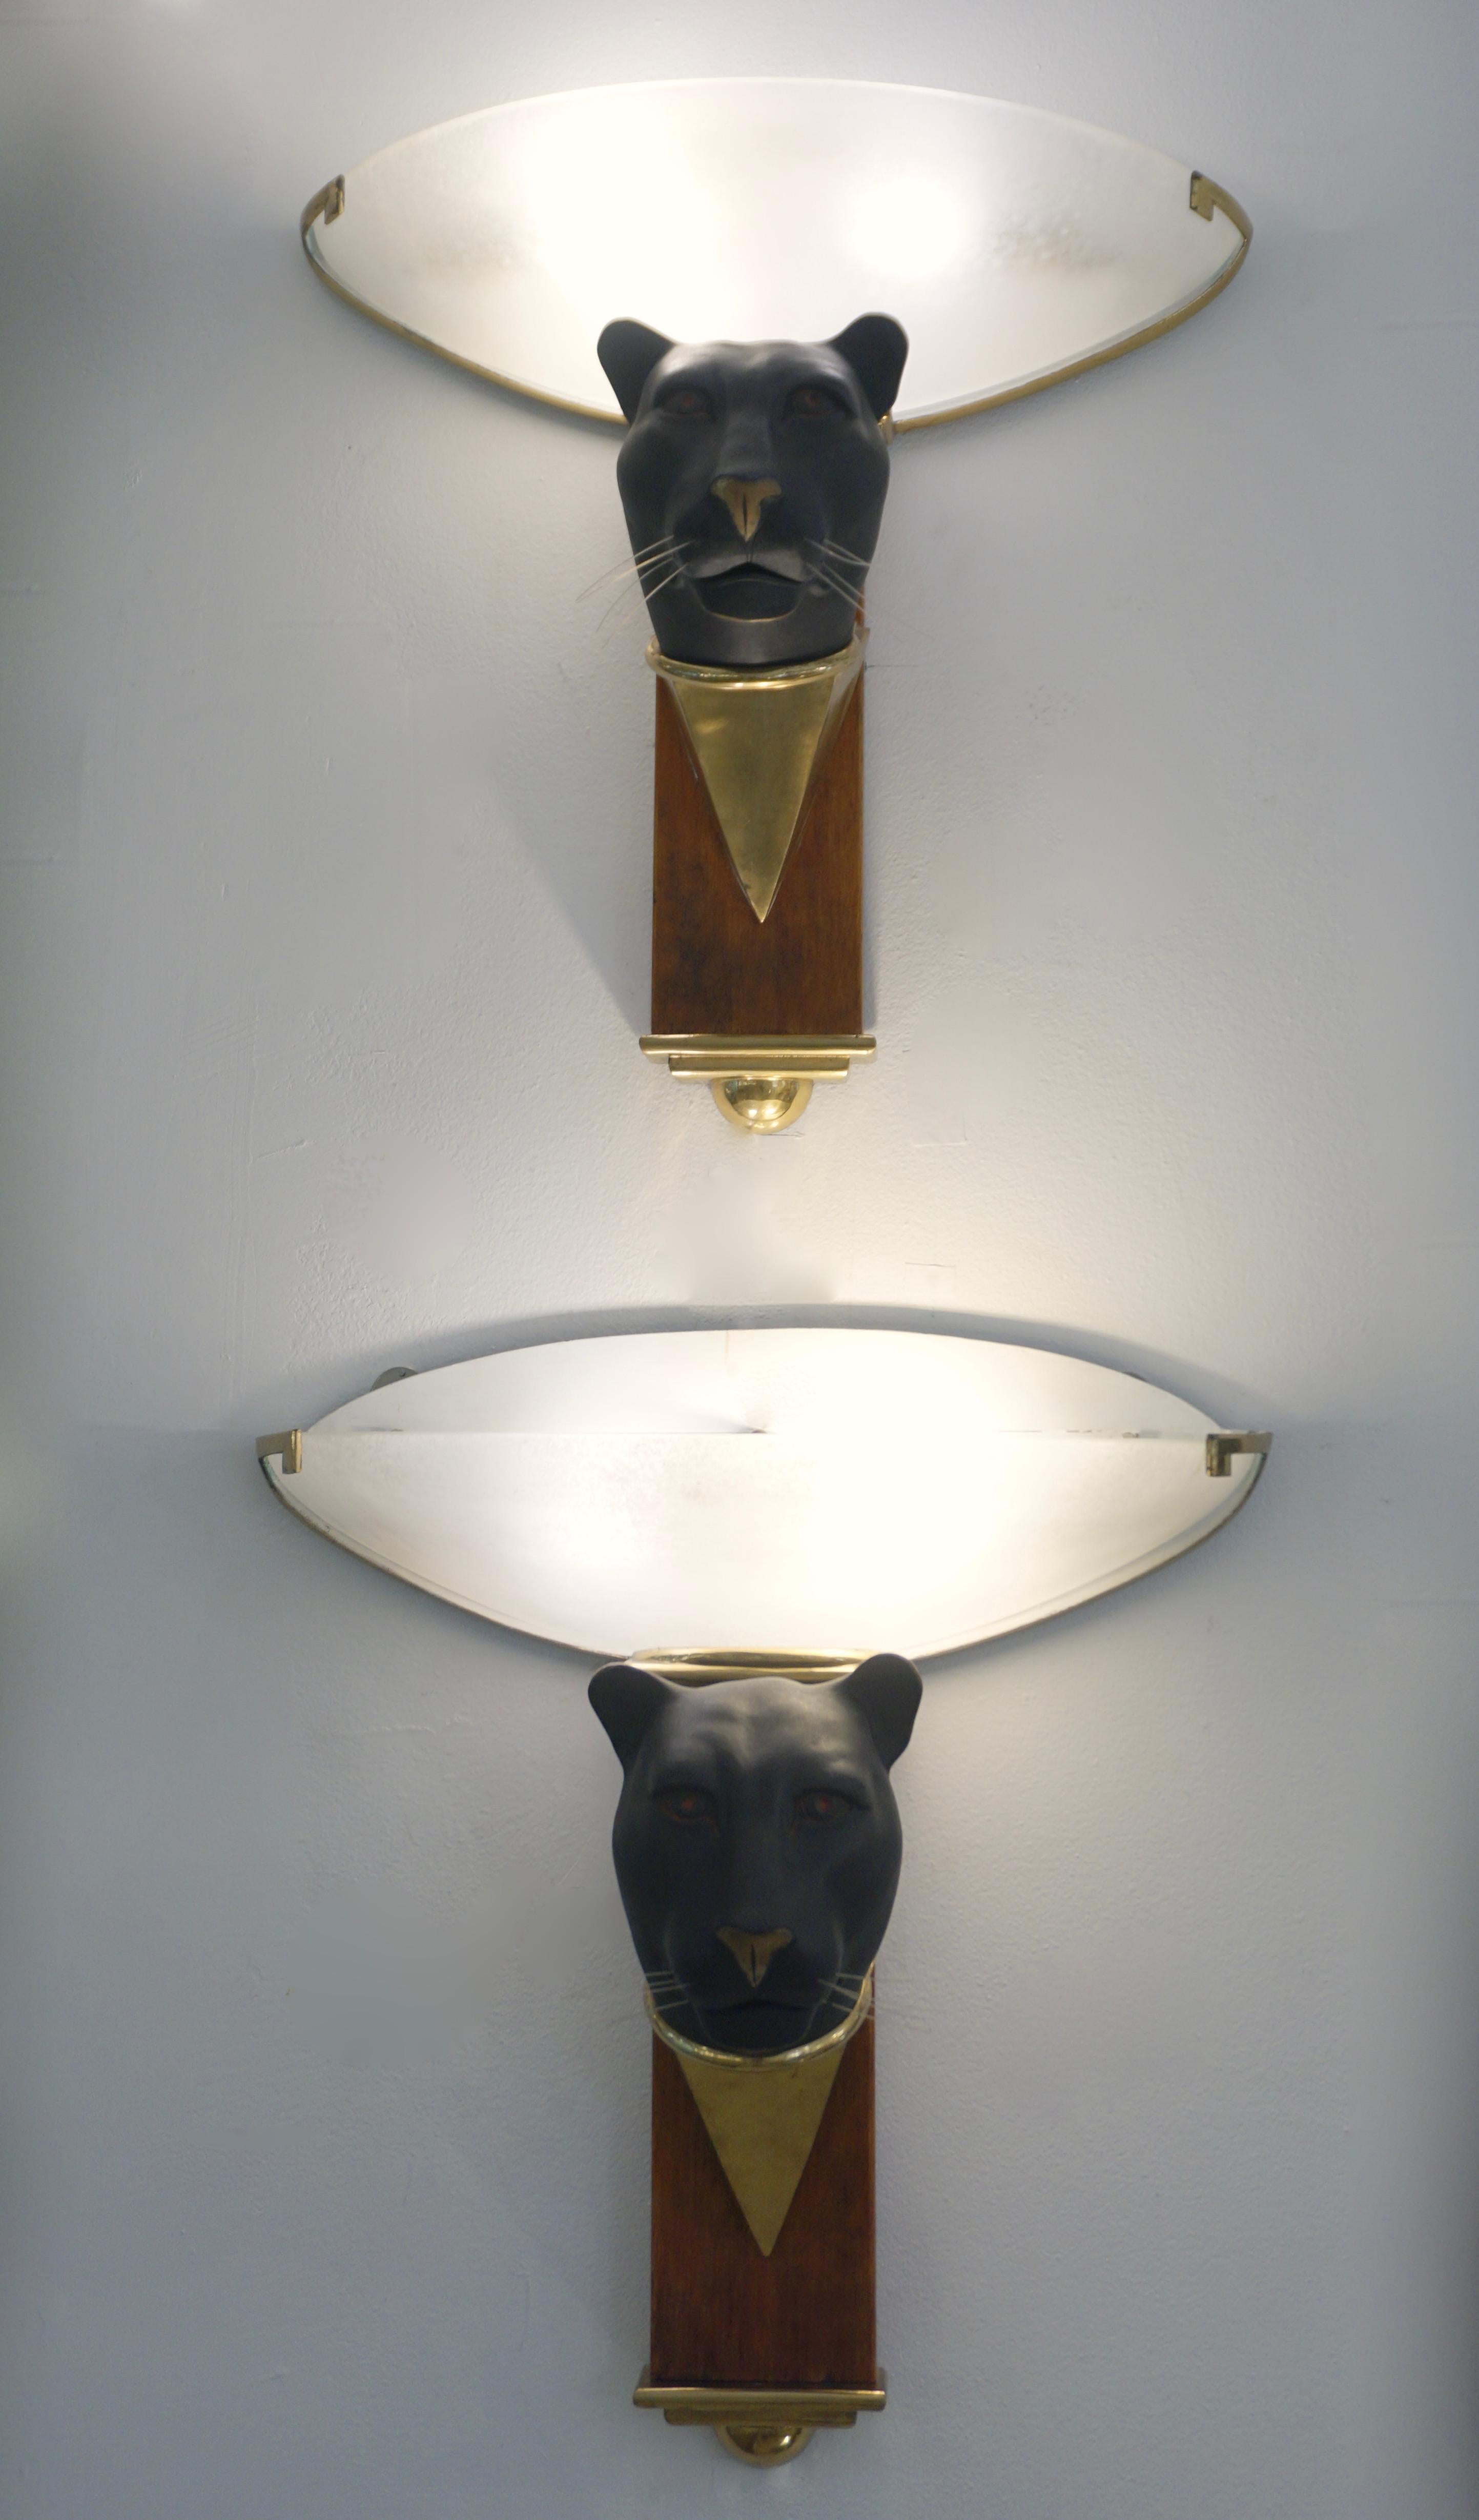 A very rare pair of Italian animals sculptural sconces of ethnic design, representing the head of black panthers with whiskers in black patinated bronze resting on conical brass support leaning on a wooden column, the bottom finished with an Art